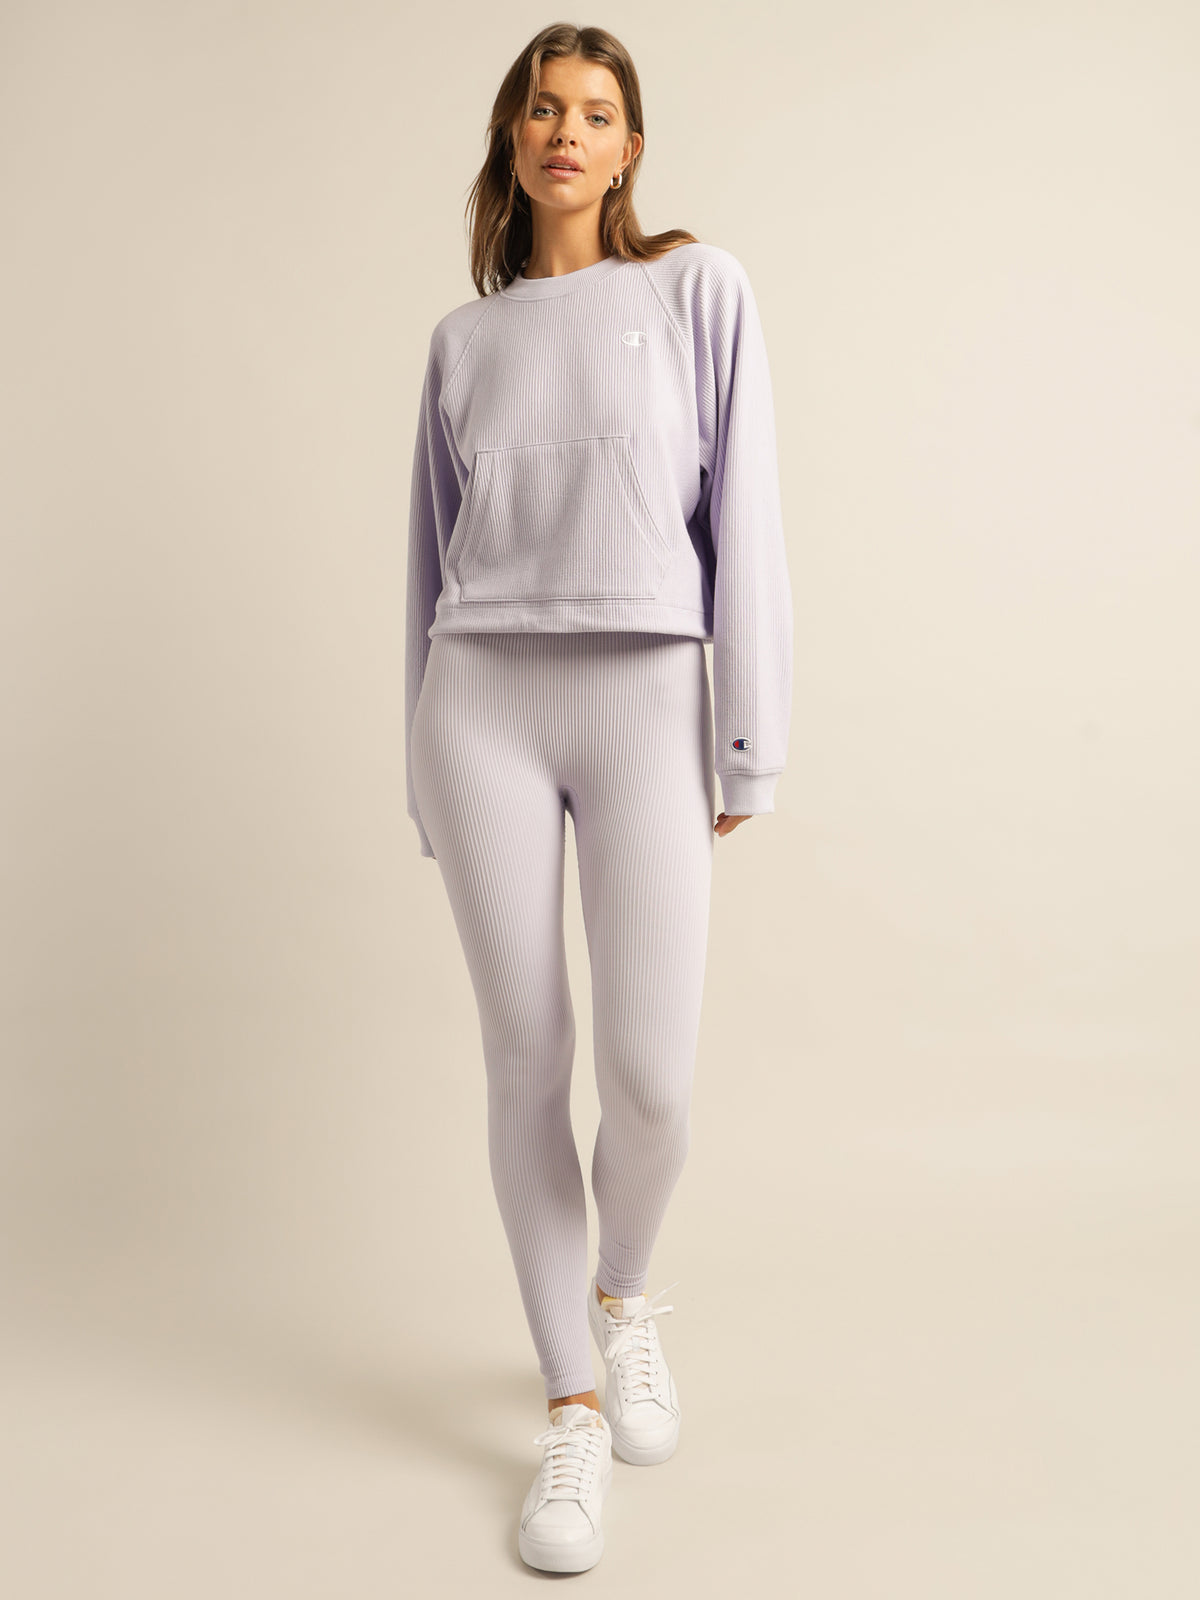 Re:Bound High-Rise Ribbed Stretch Leggings in Urban Lilac